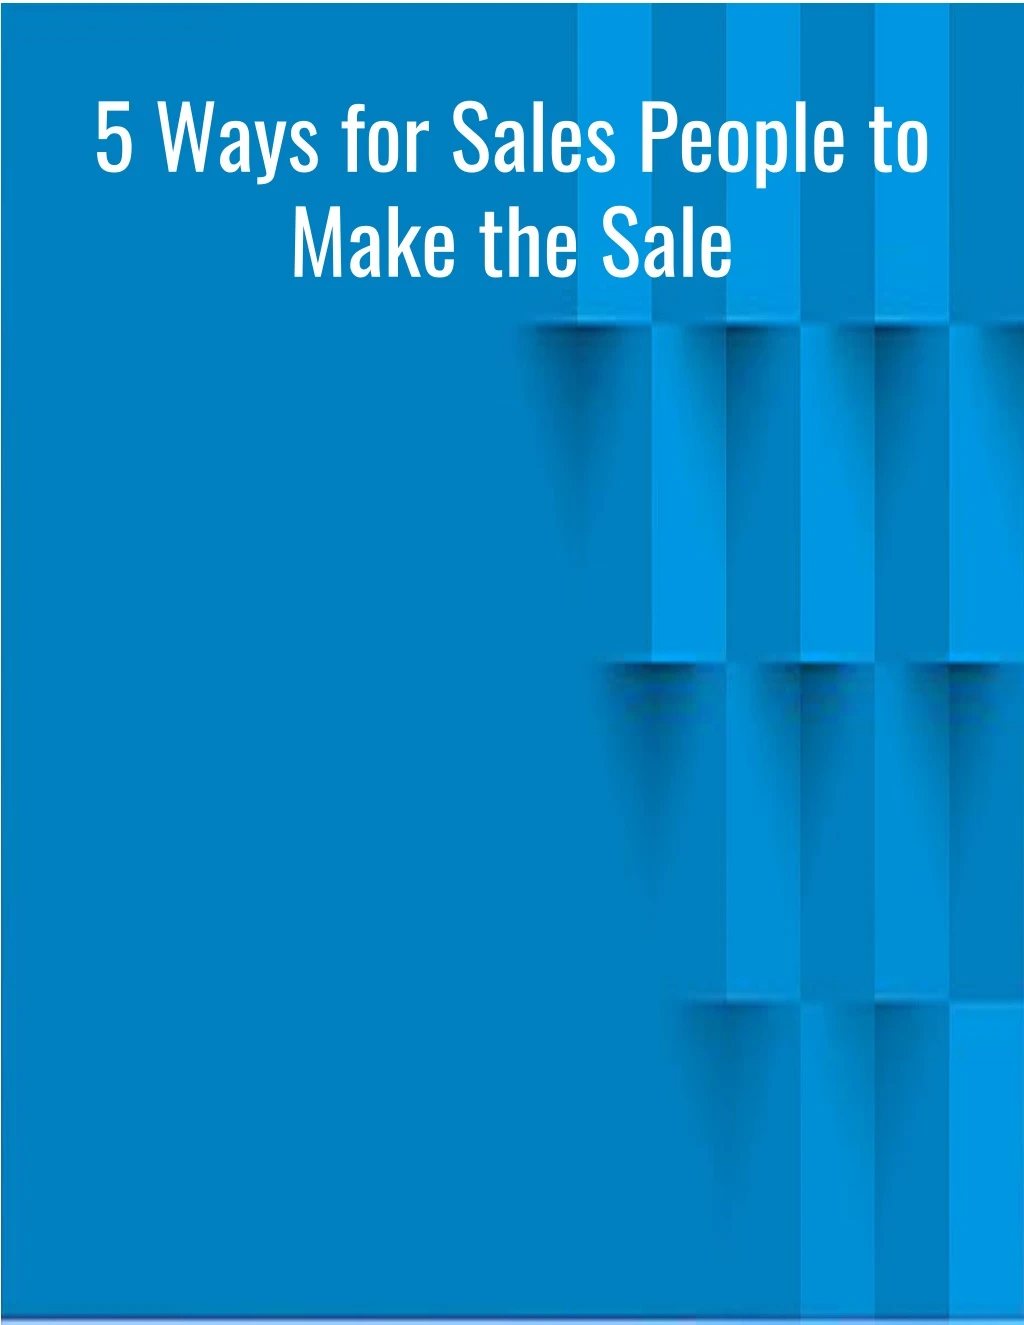 5 ways for sales people to make the sale